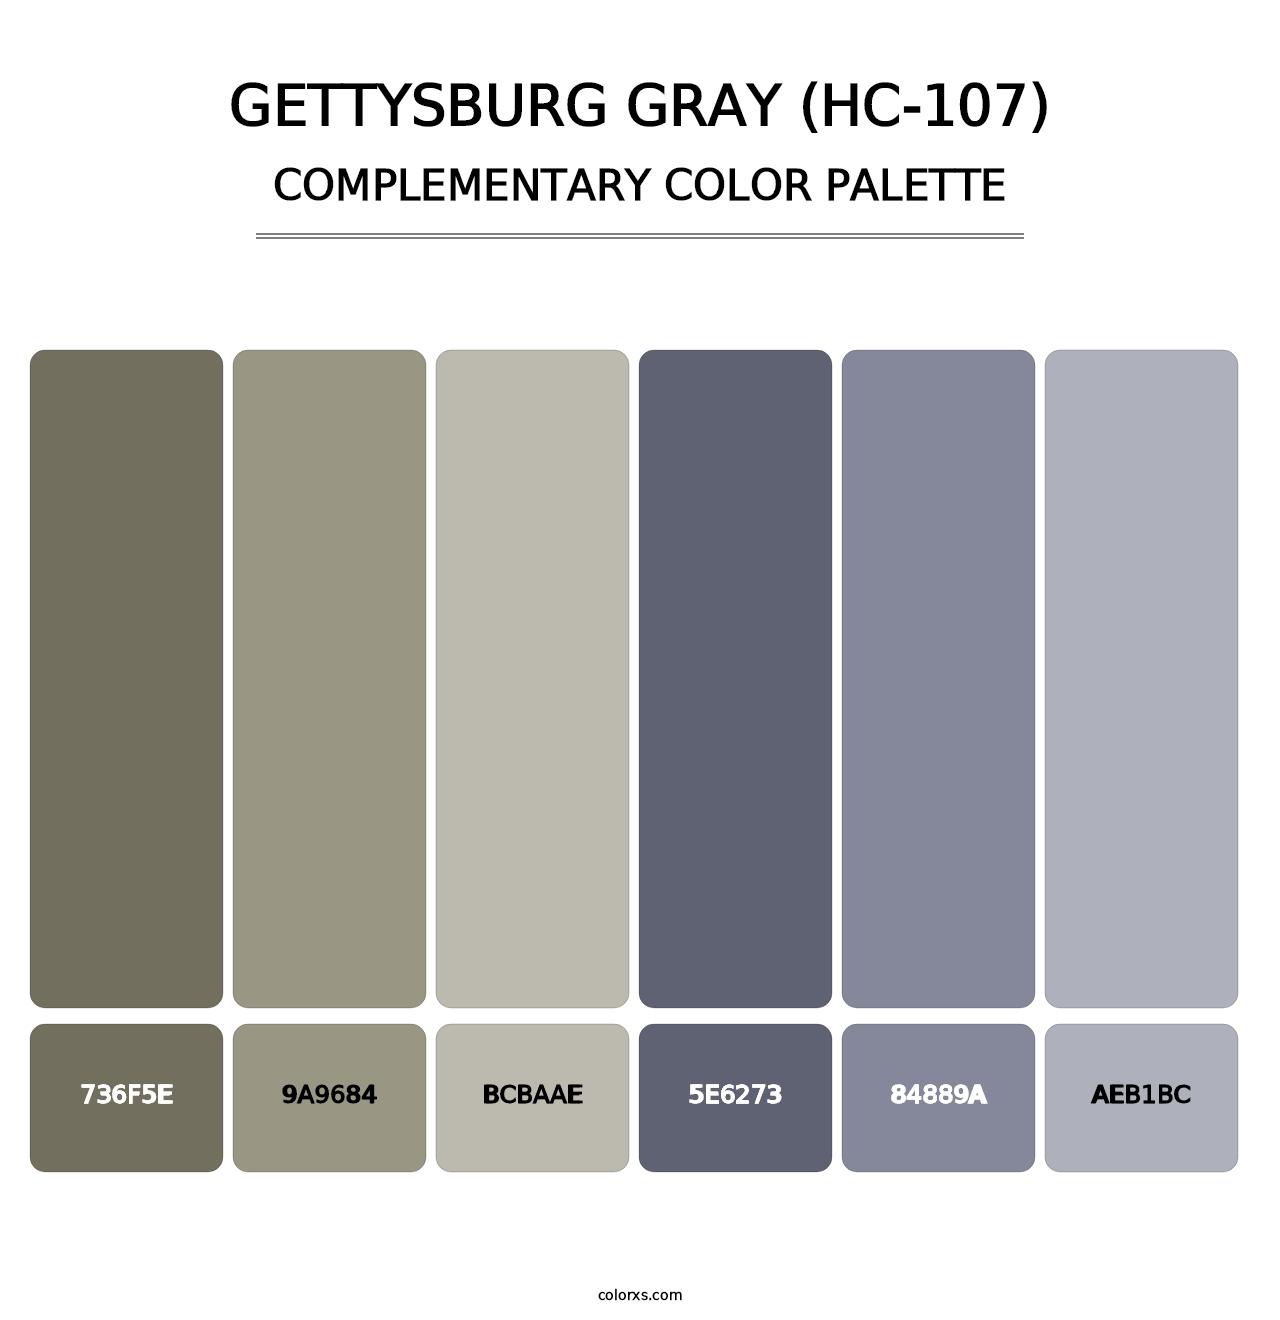 Gettysburg Gray (HC-107) - Complementary Color Palette